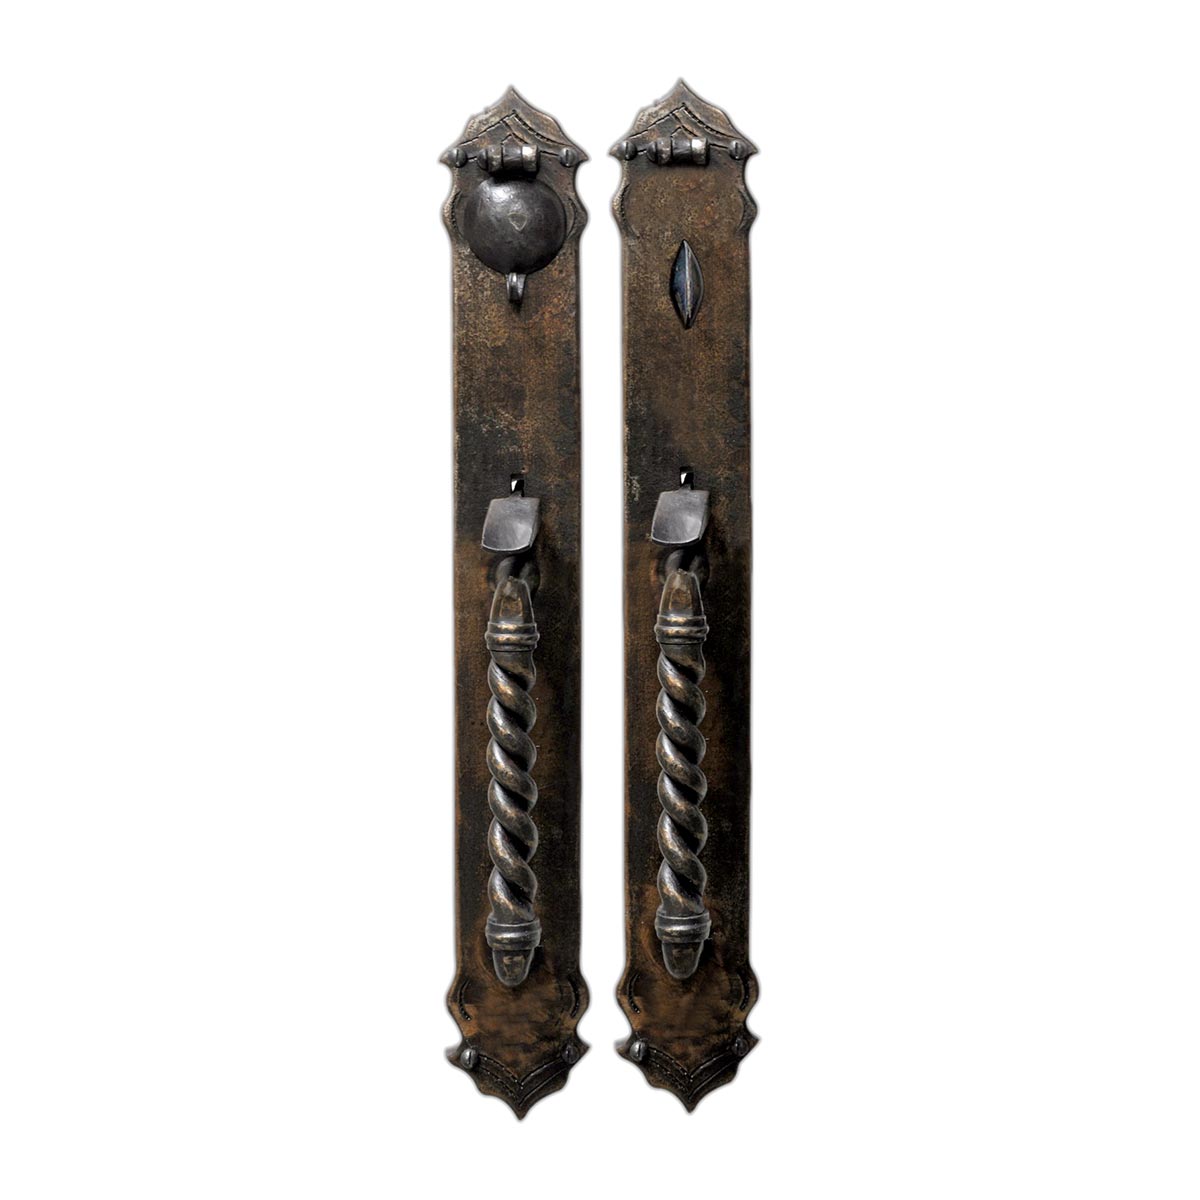 Hand Forged Iron Avila Thumblatch Mortise Entry Set